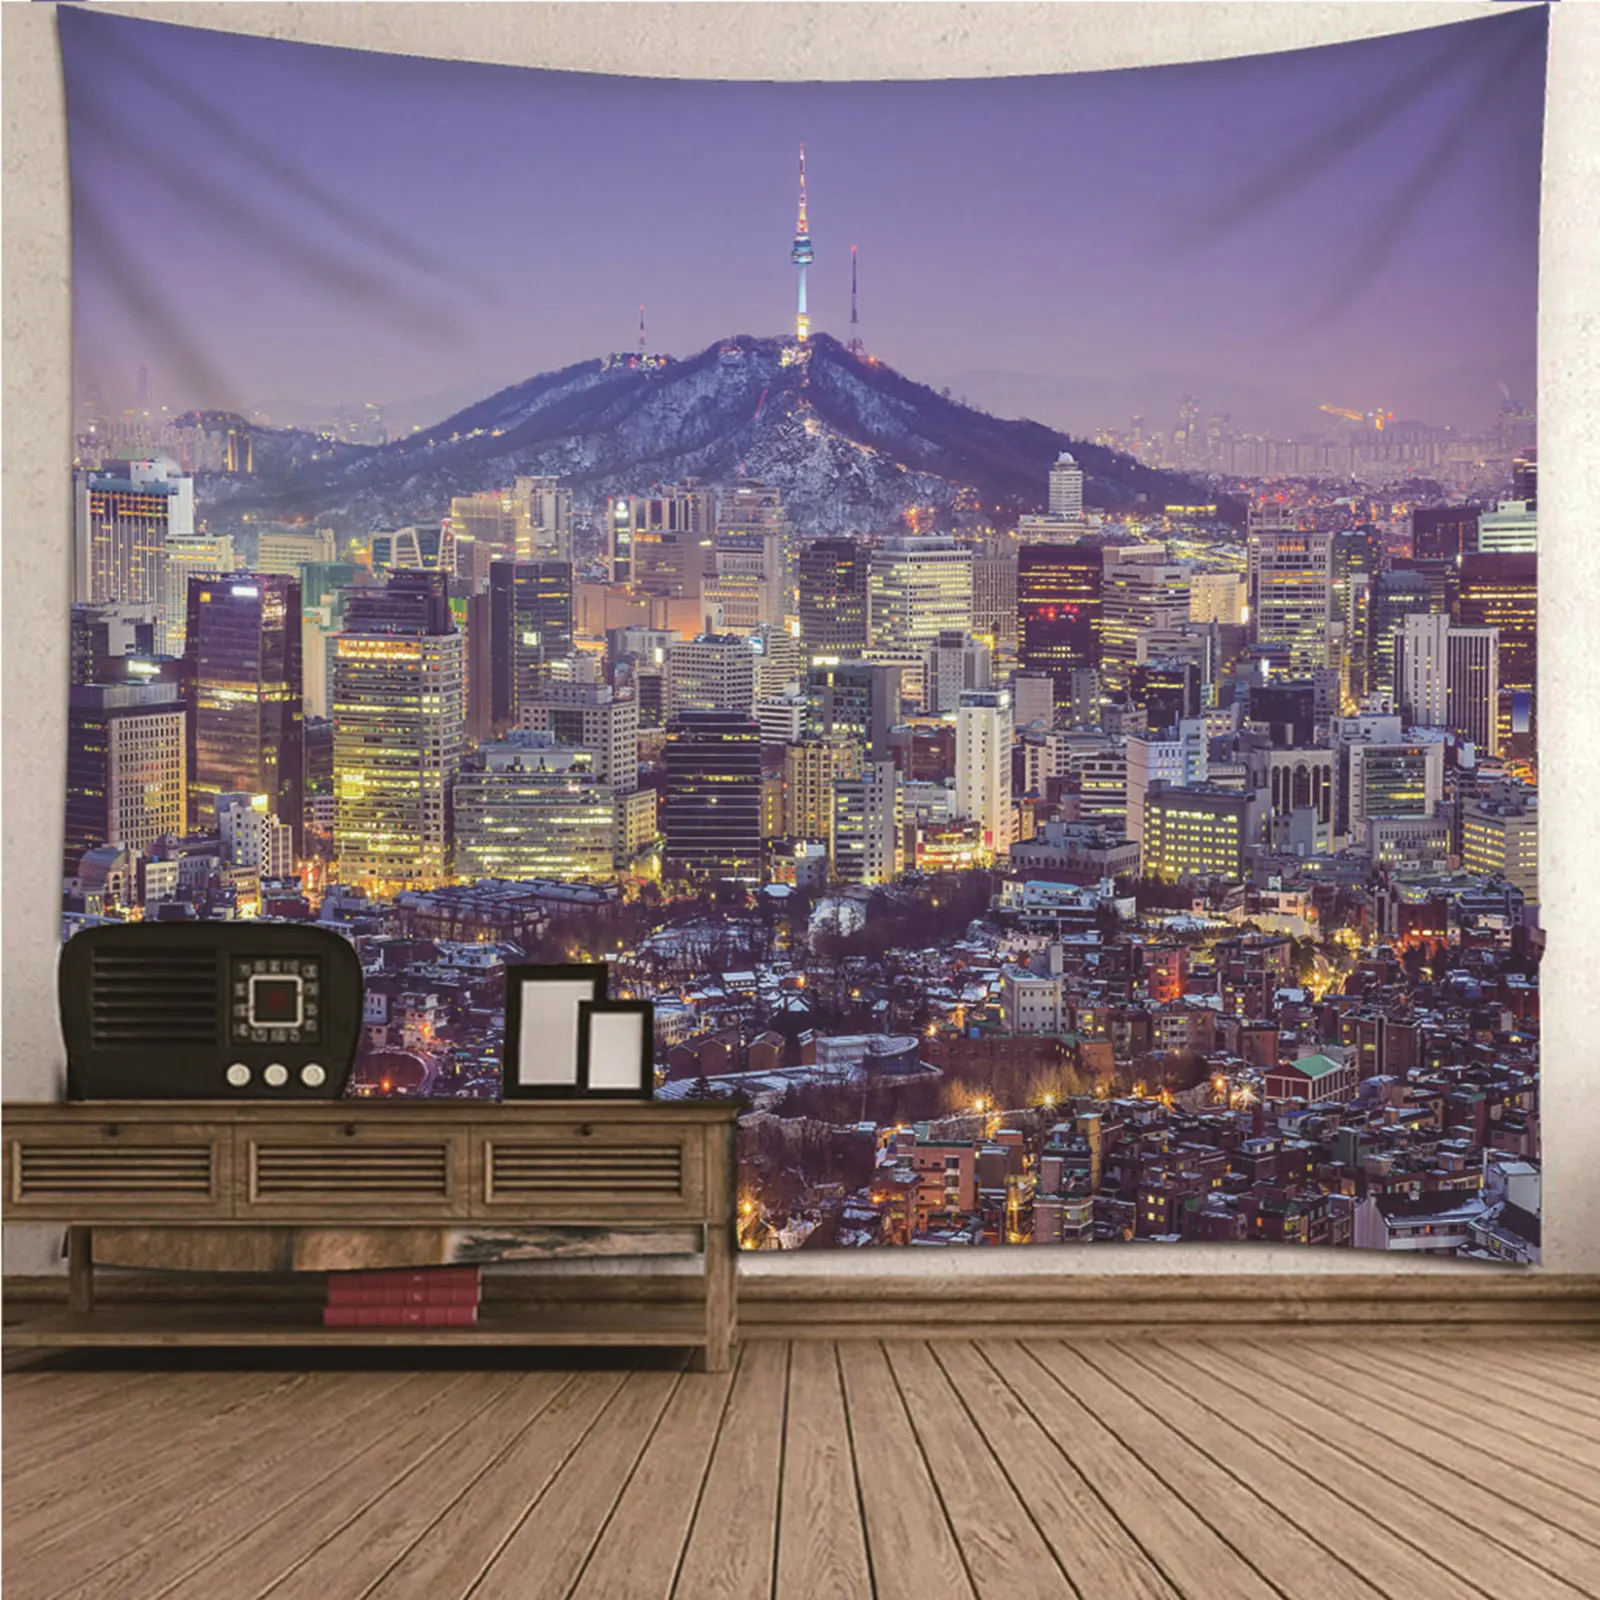 

Colorful Tapestry Wall Hanging Bedroom natural scenery Night View of Modern City Wall Hanging Blanket Dorm Art Decor Covering